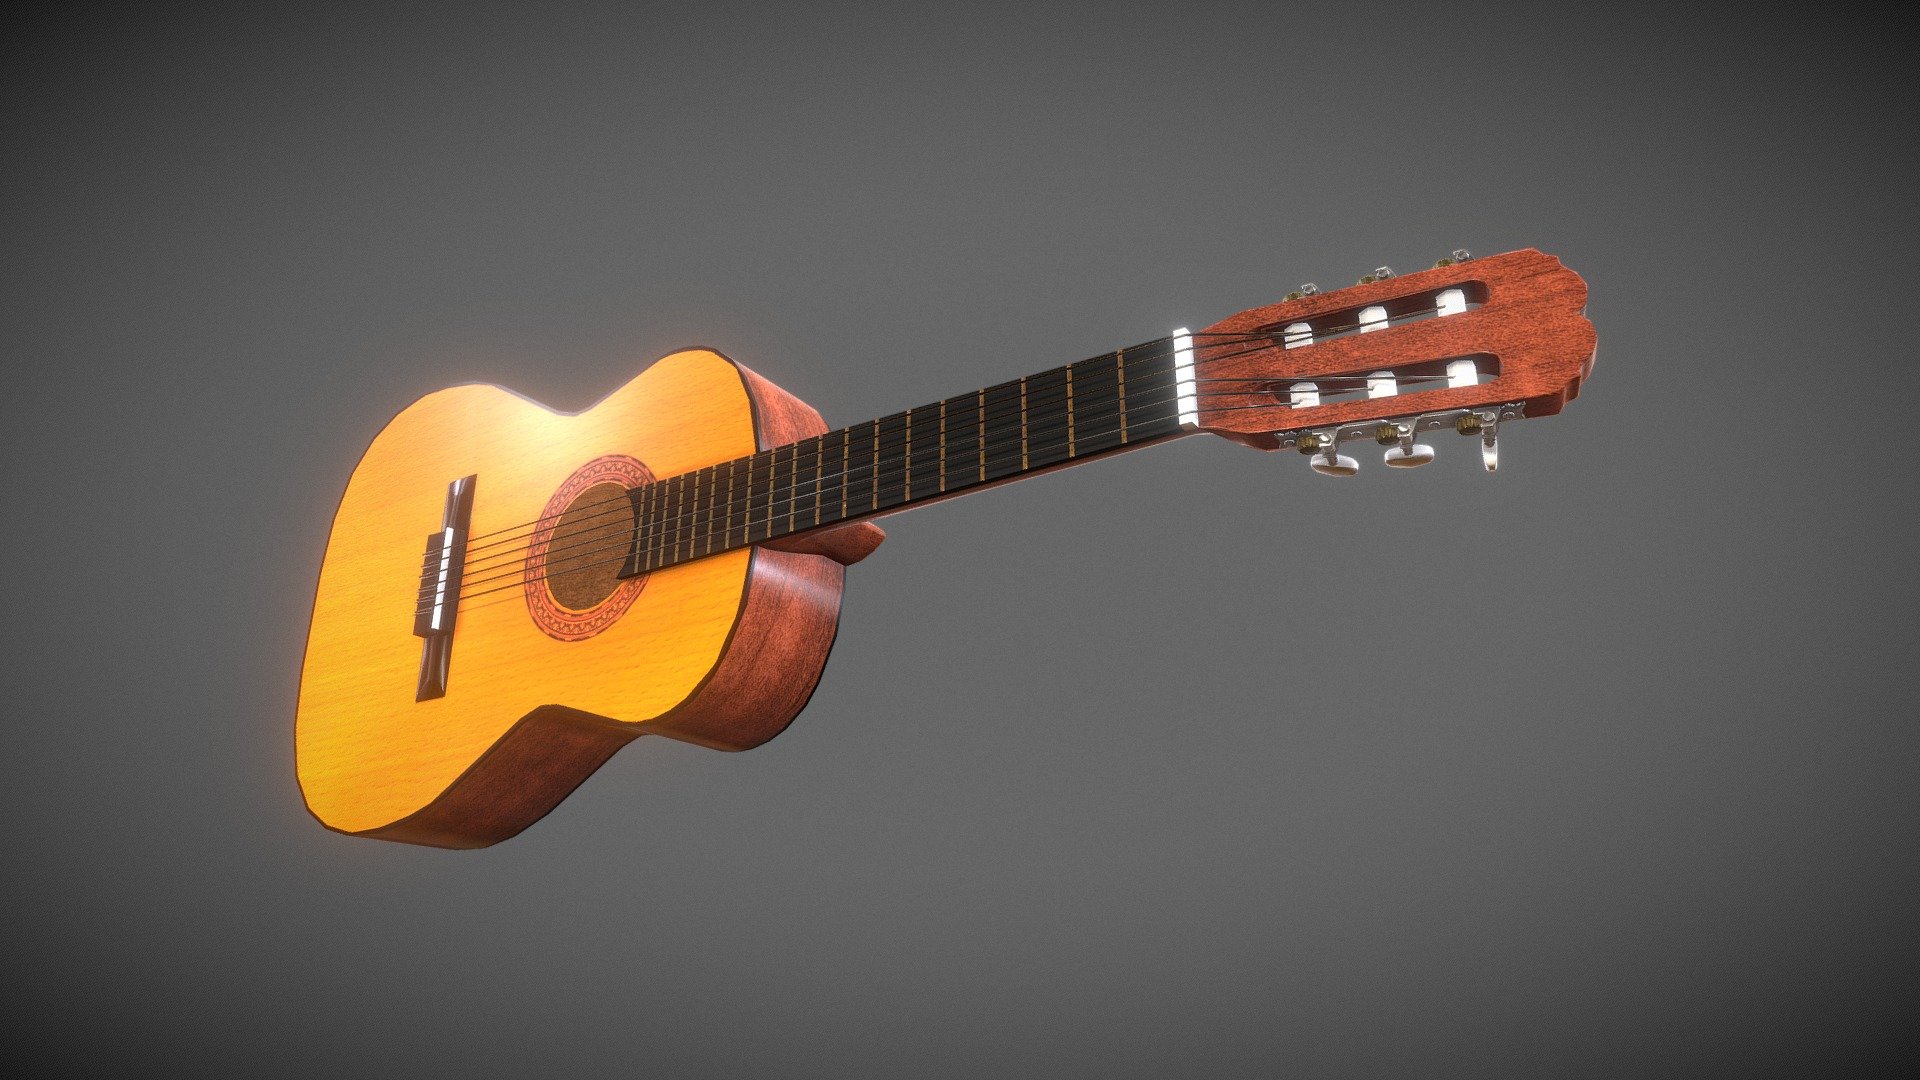 Model made for practice. Modeled in Blender, textured in Photoshop, normals baked in xNormal 3d model